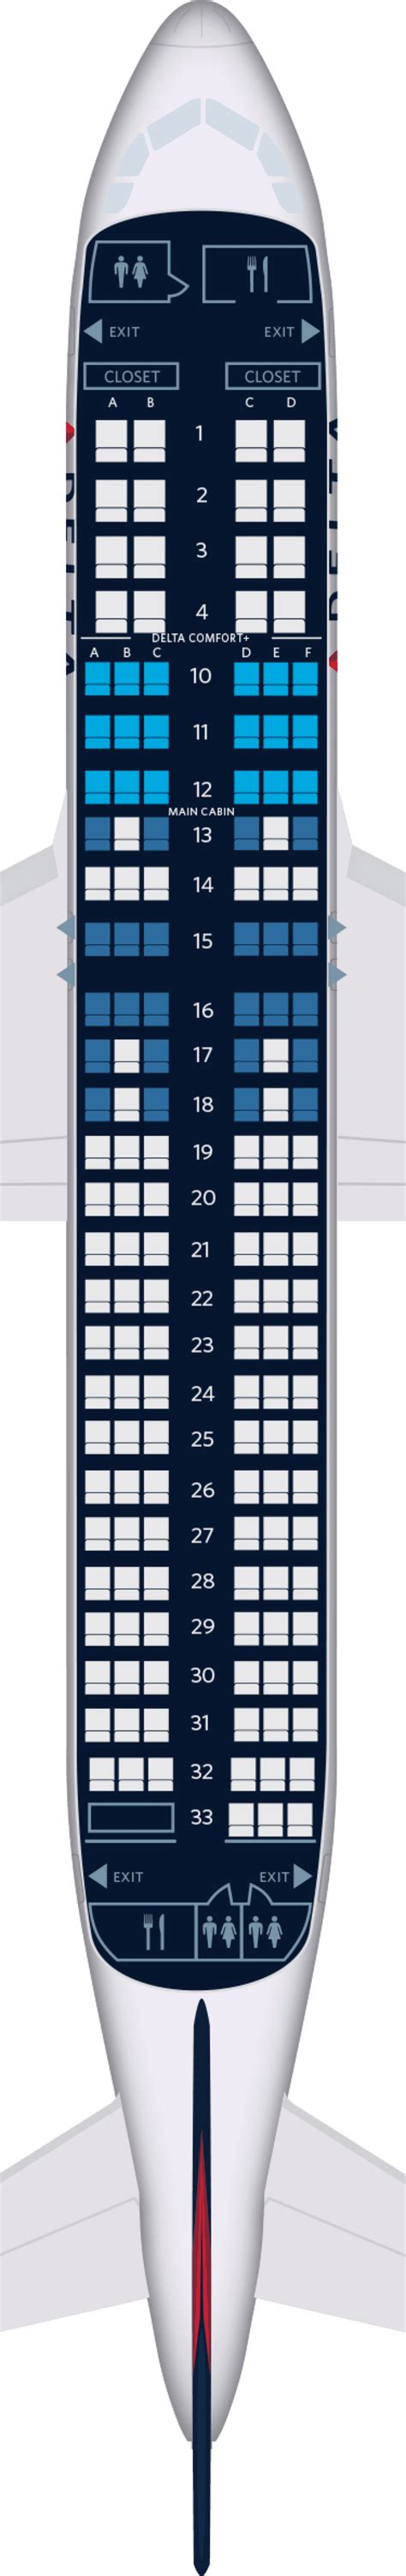 Overview. This Airbus A320 (320) seats 150 passengers and is primarily used on Domestic routes. This next-generation aircraft features a First Class cabin outfitted with 12 recliner seats. The Economy Plus cabin is outfitted with 42 seats and Economy Class features 96 seats.. 